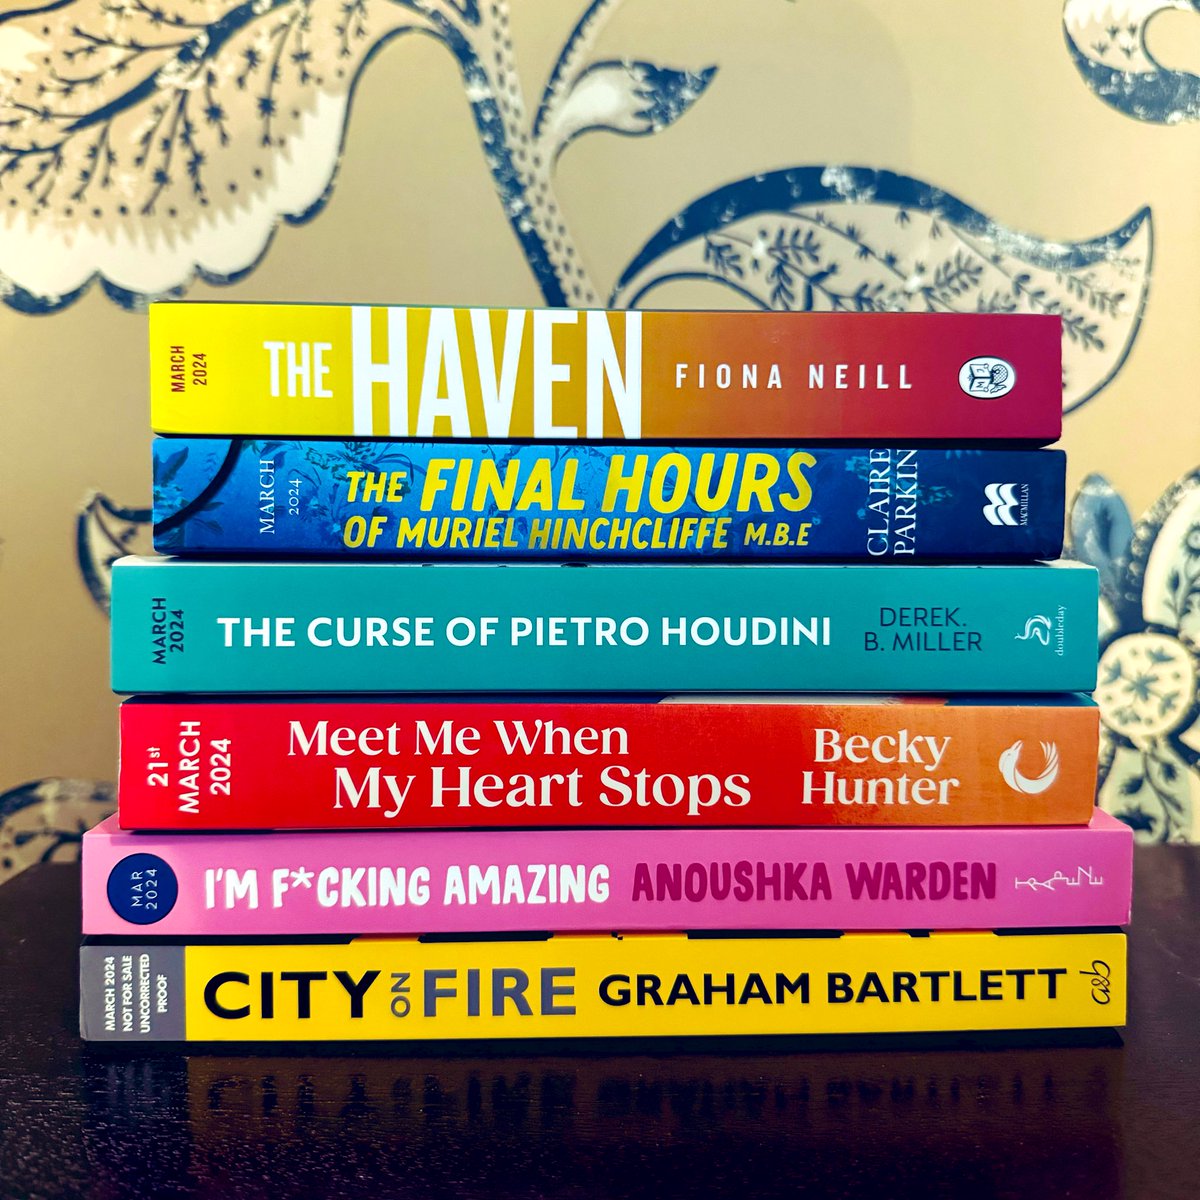 Happy Publication Day to the authors of all these books out today. Some crackers in there!